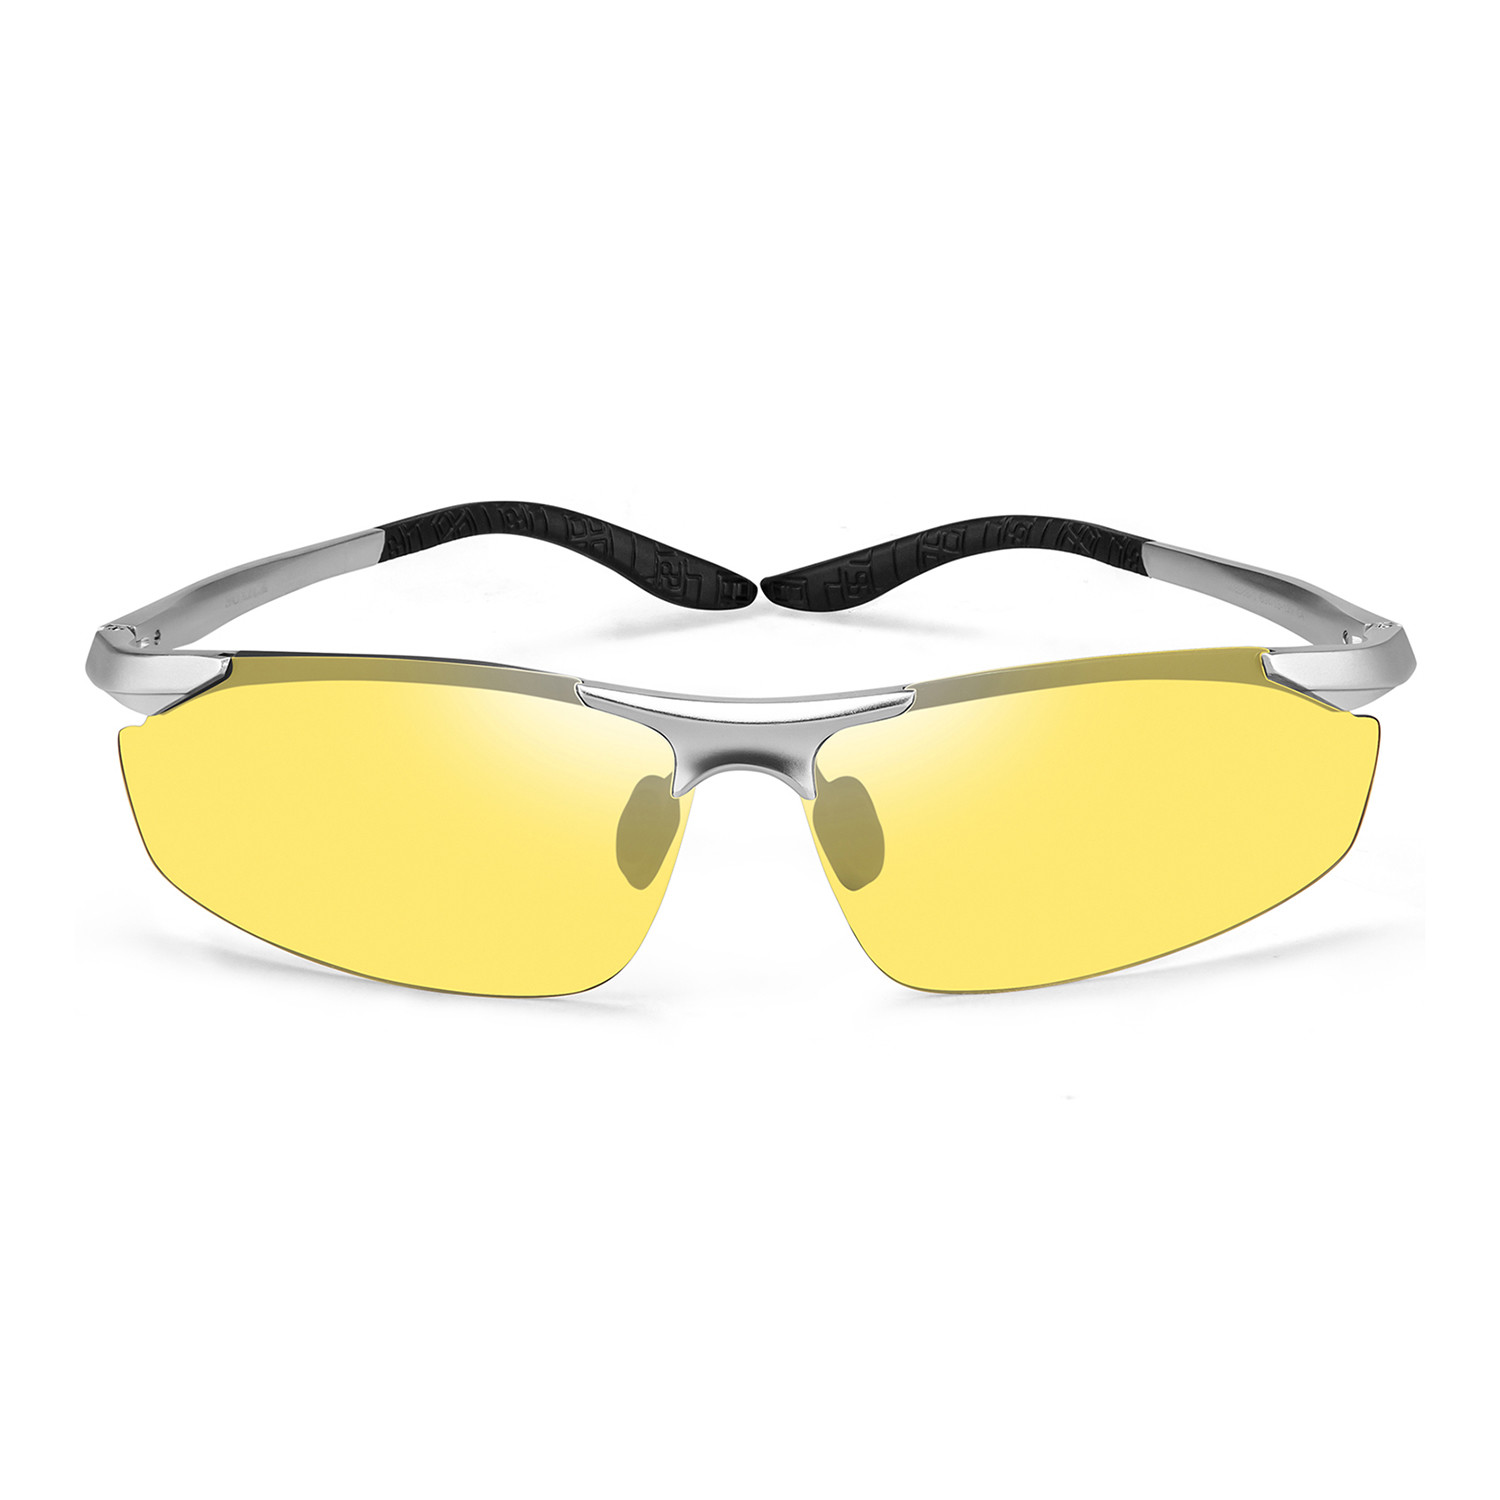 Night Vision Glasses 3356 Silver Soxick Permanent Store Touch